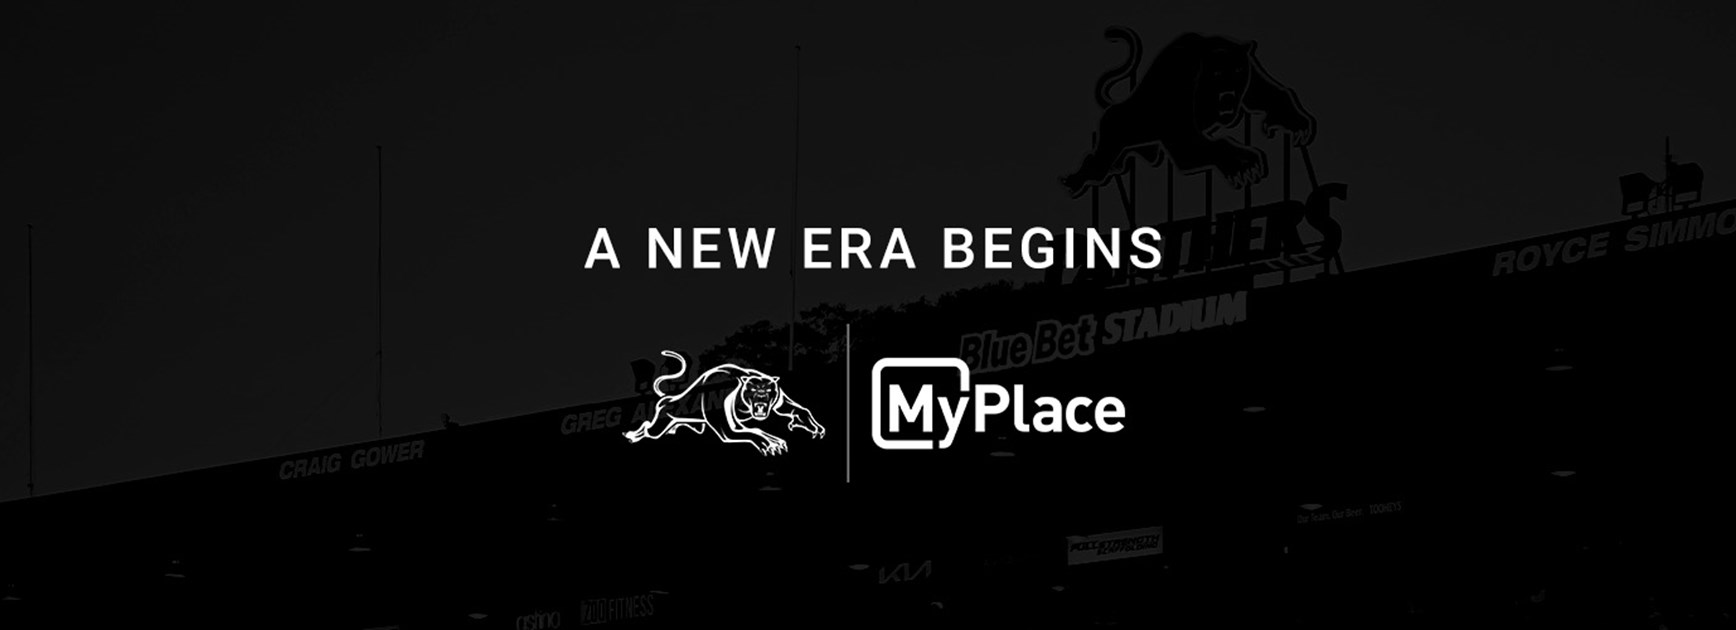 MyPlace announced as Panthers Principal Partner